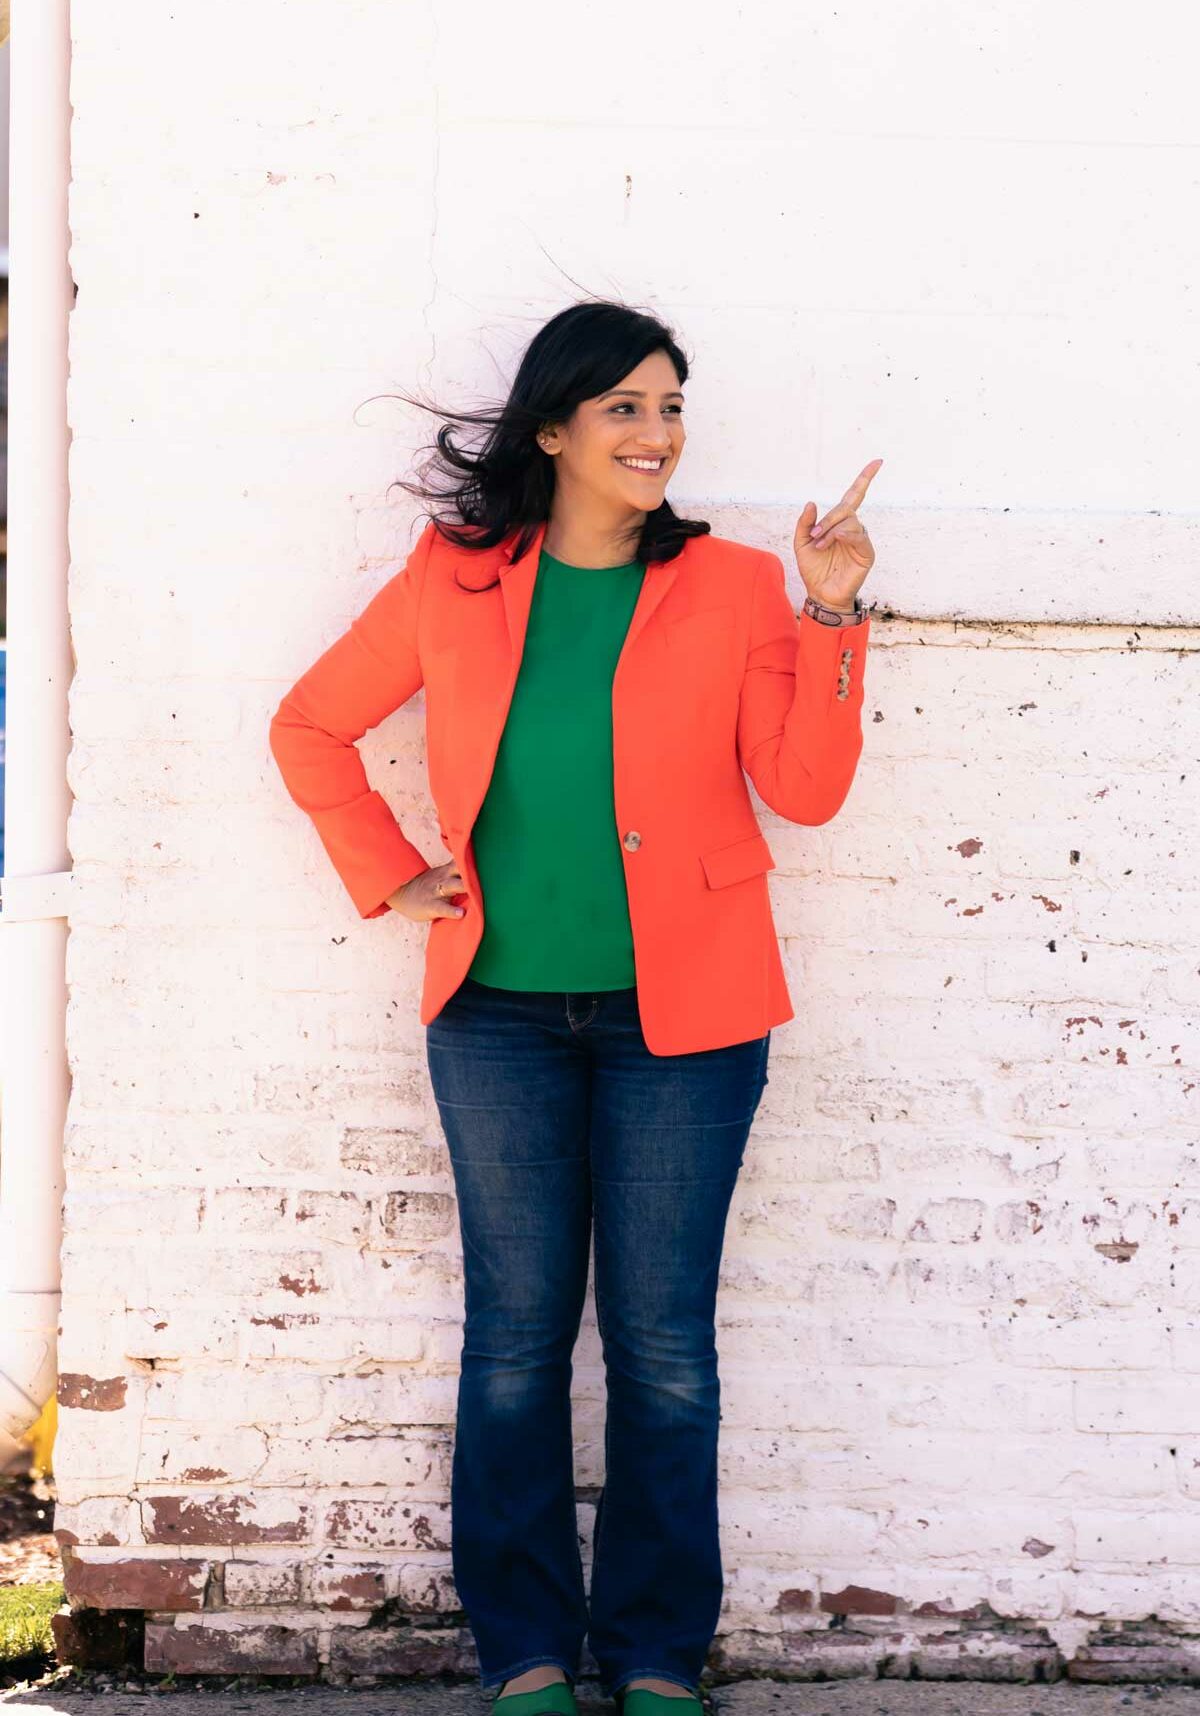 Ruchi Kaul MD, a doctor in an orange blazer and green shirt, pointing over her right shoulder while smiling